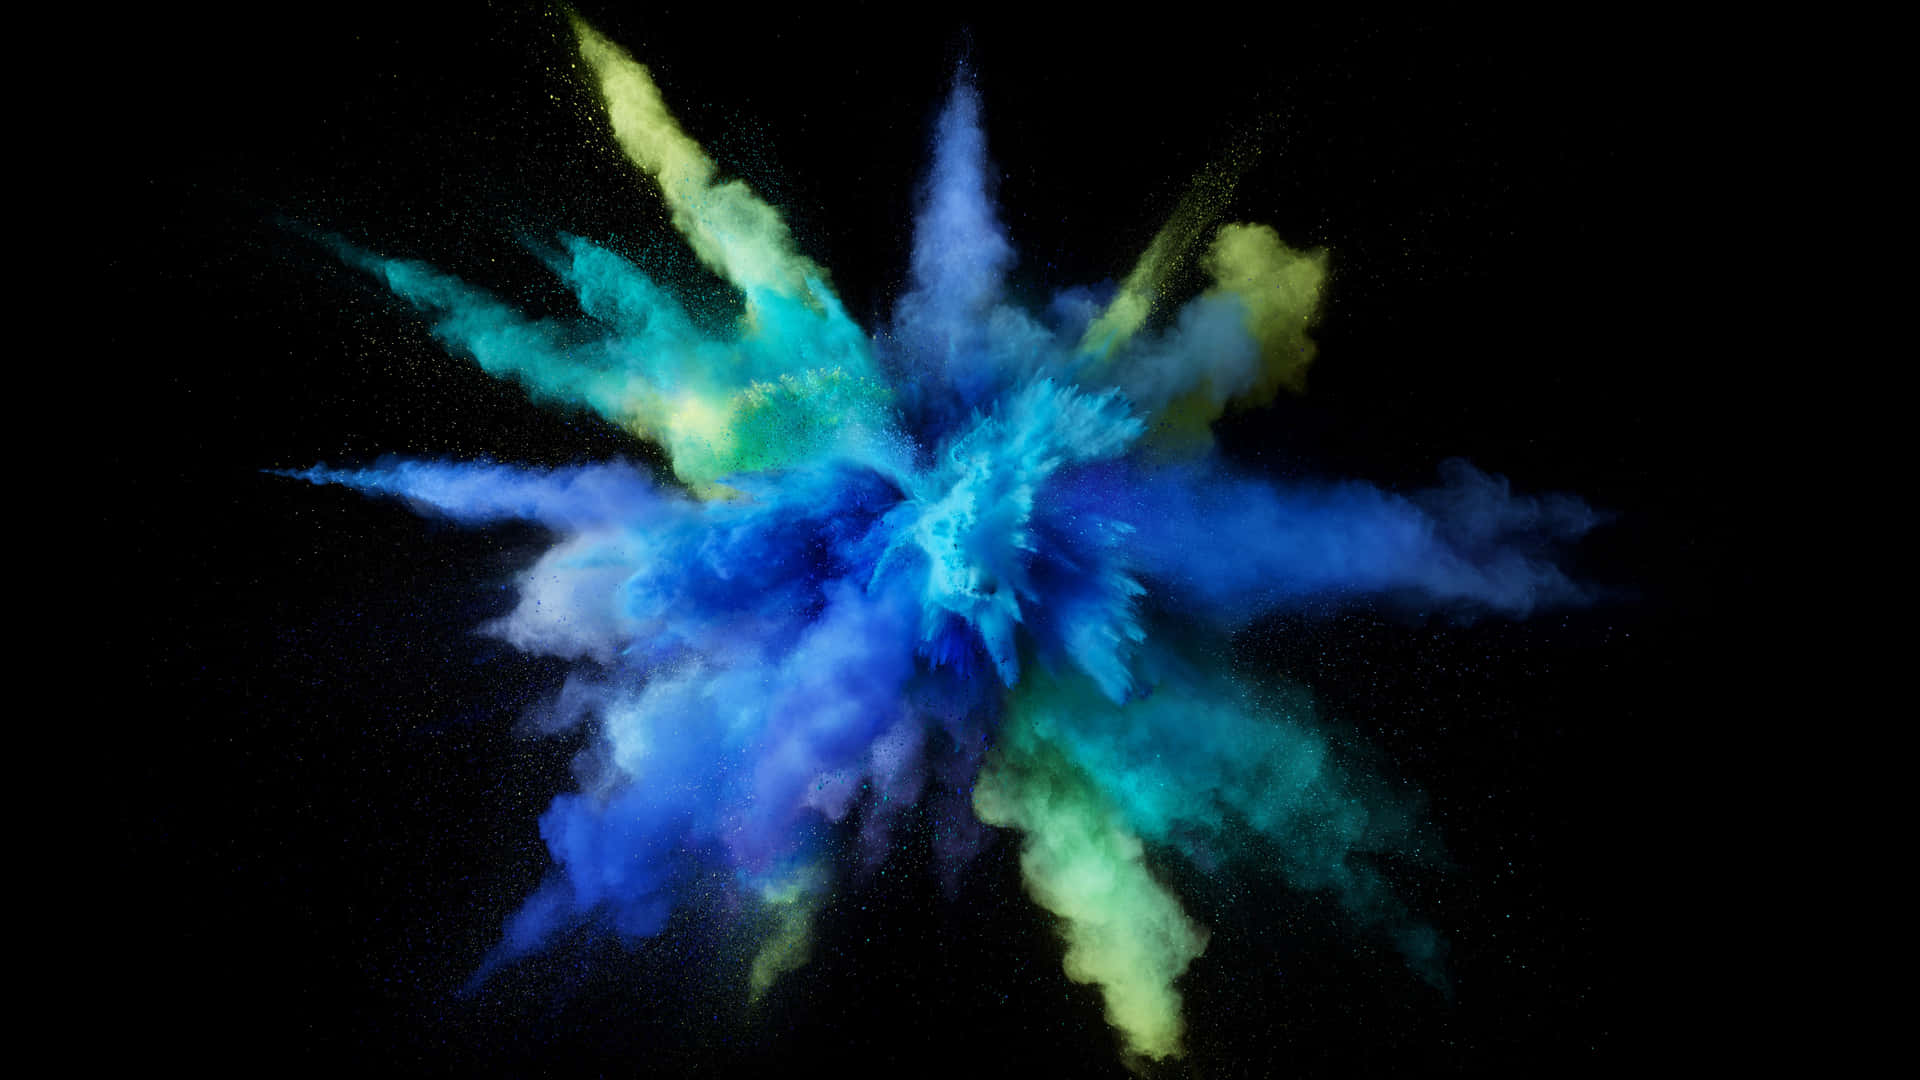 Colorful Nebula Explosion Abstract Wallpaper